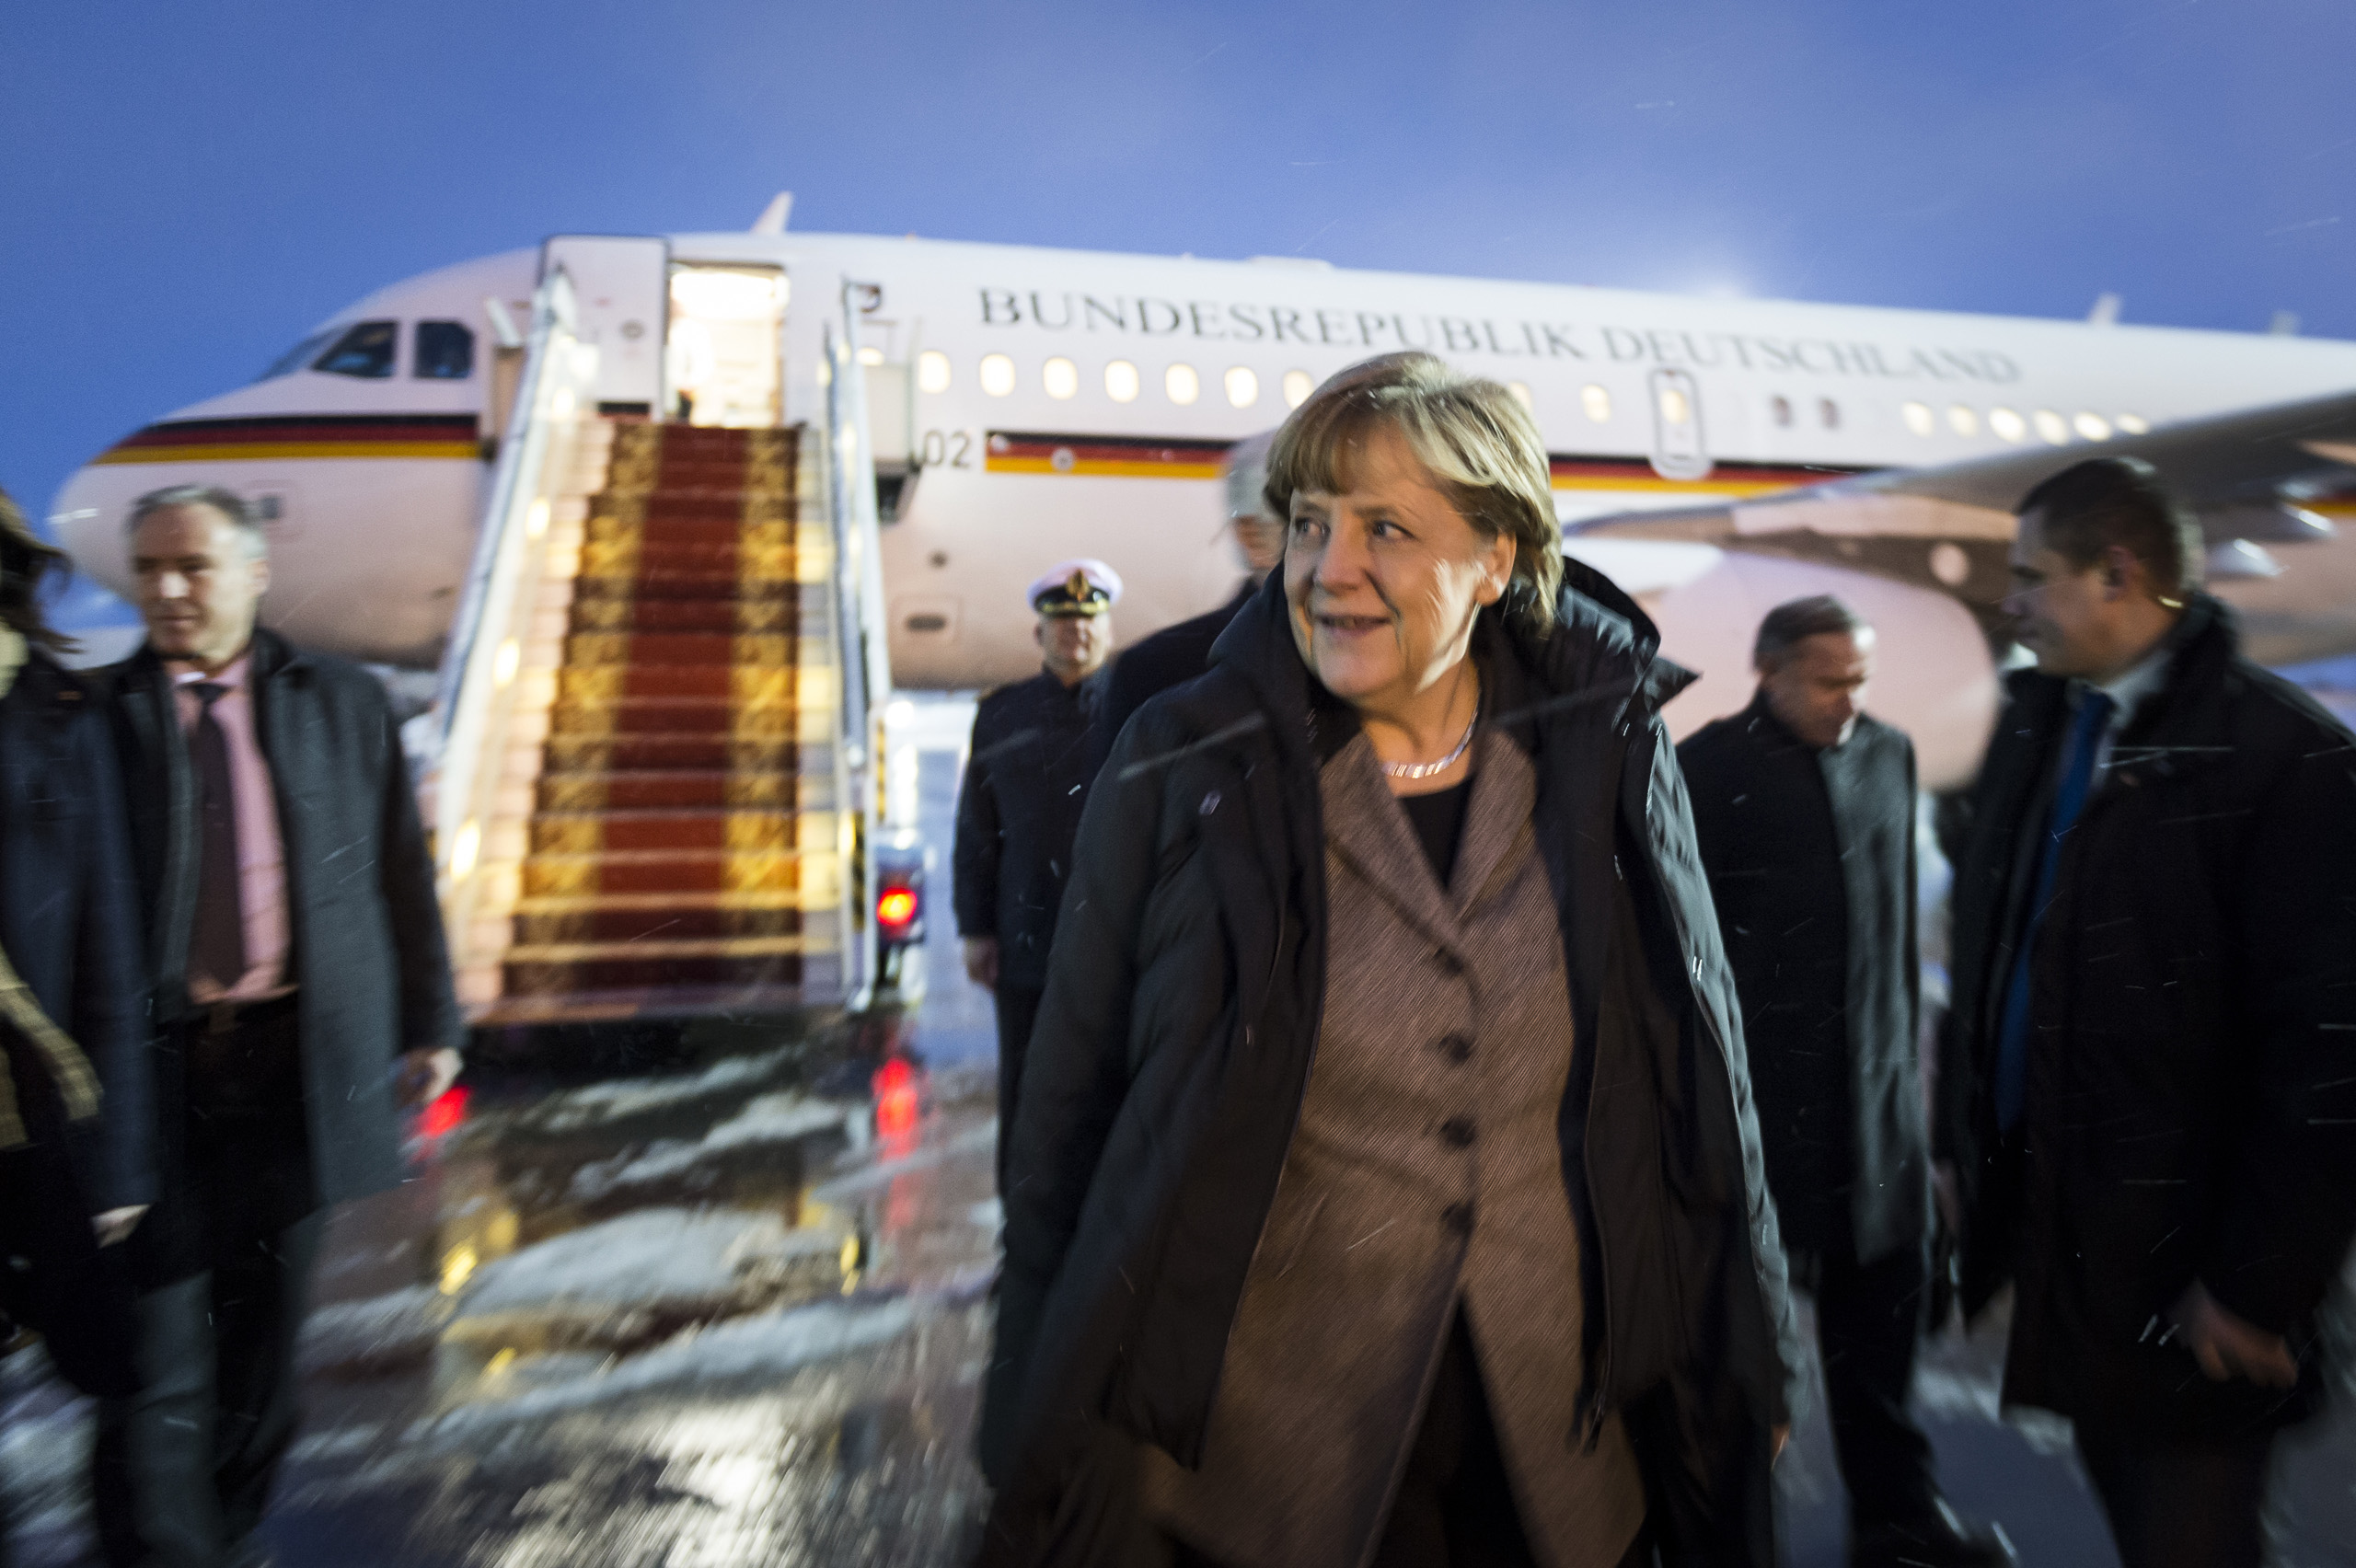 Chancellor Angela Merkel leaves the plane at the airport of Kiev, after arriving for another round of negotiations with the presidents of France, Ukraine and Russia to settle the conflict in Ukraine. Feb. 5, 2015.